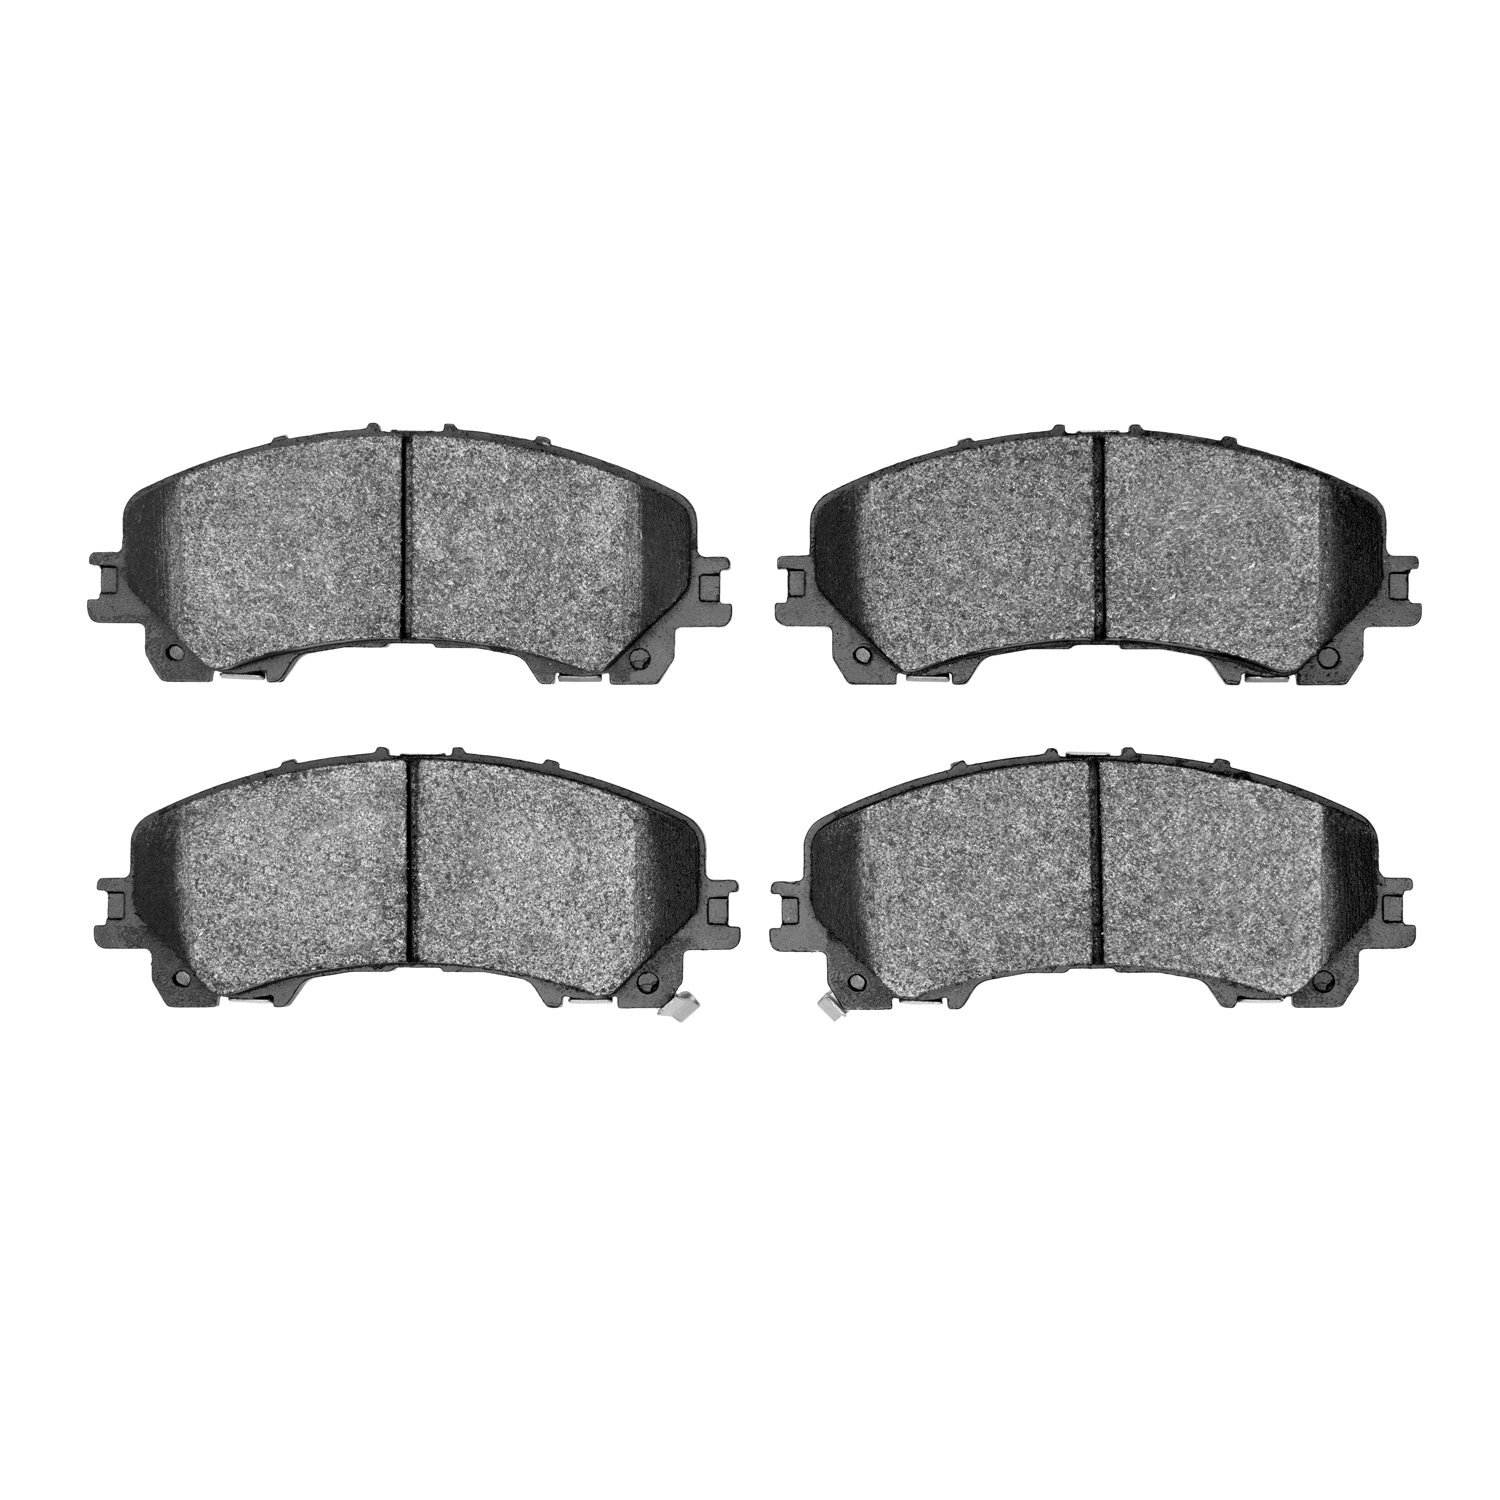 1310-1736-00 3000-Series Ceramic Brake Pads, Fits Select Infiniti/Nissan, Position: Front